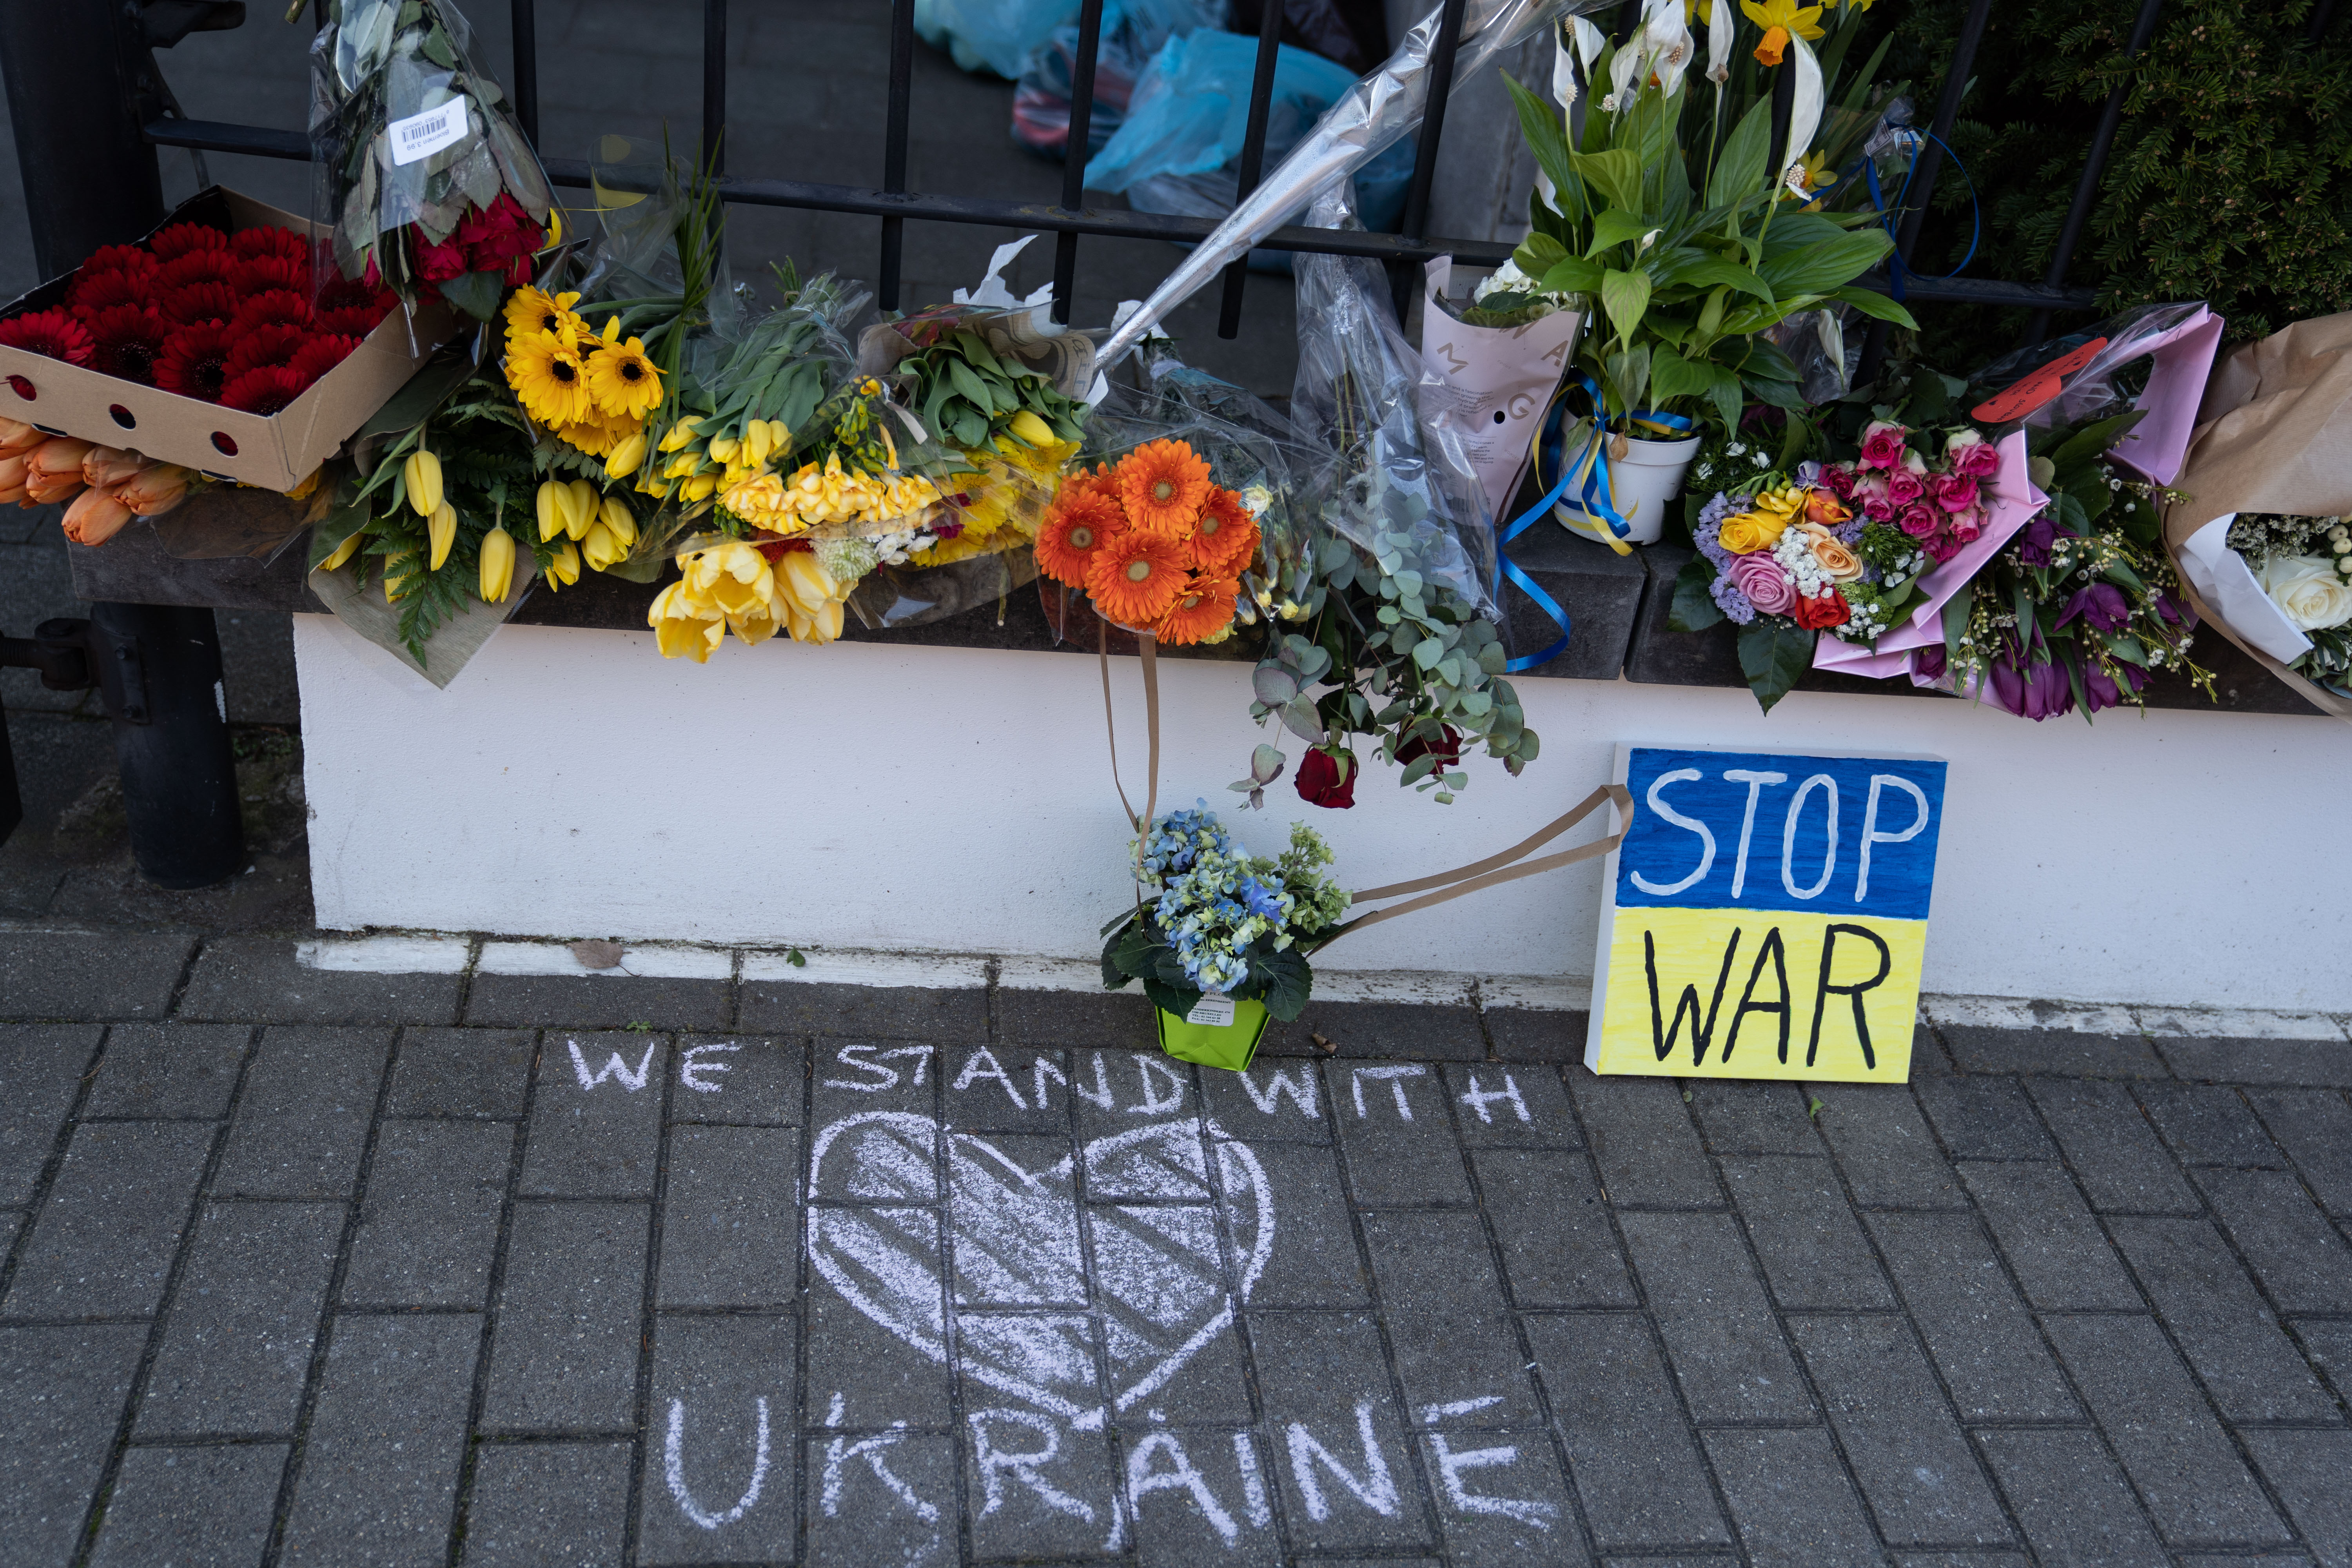 Bouquets of flowers outside the Ukraine embassy in Brussels accompany a small sign that reads, “Stop war,” and a chalked message that reads, “We stand with Ukraine” drawn with a heart.